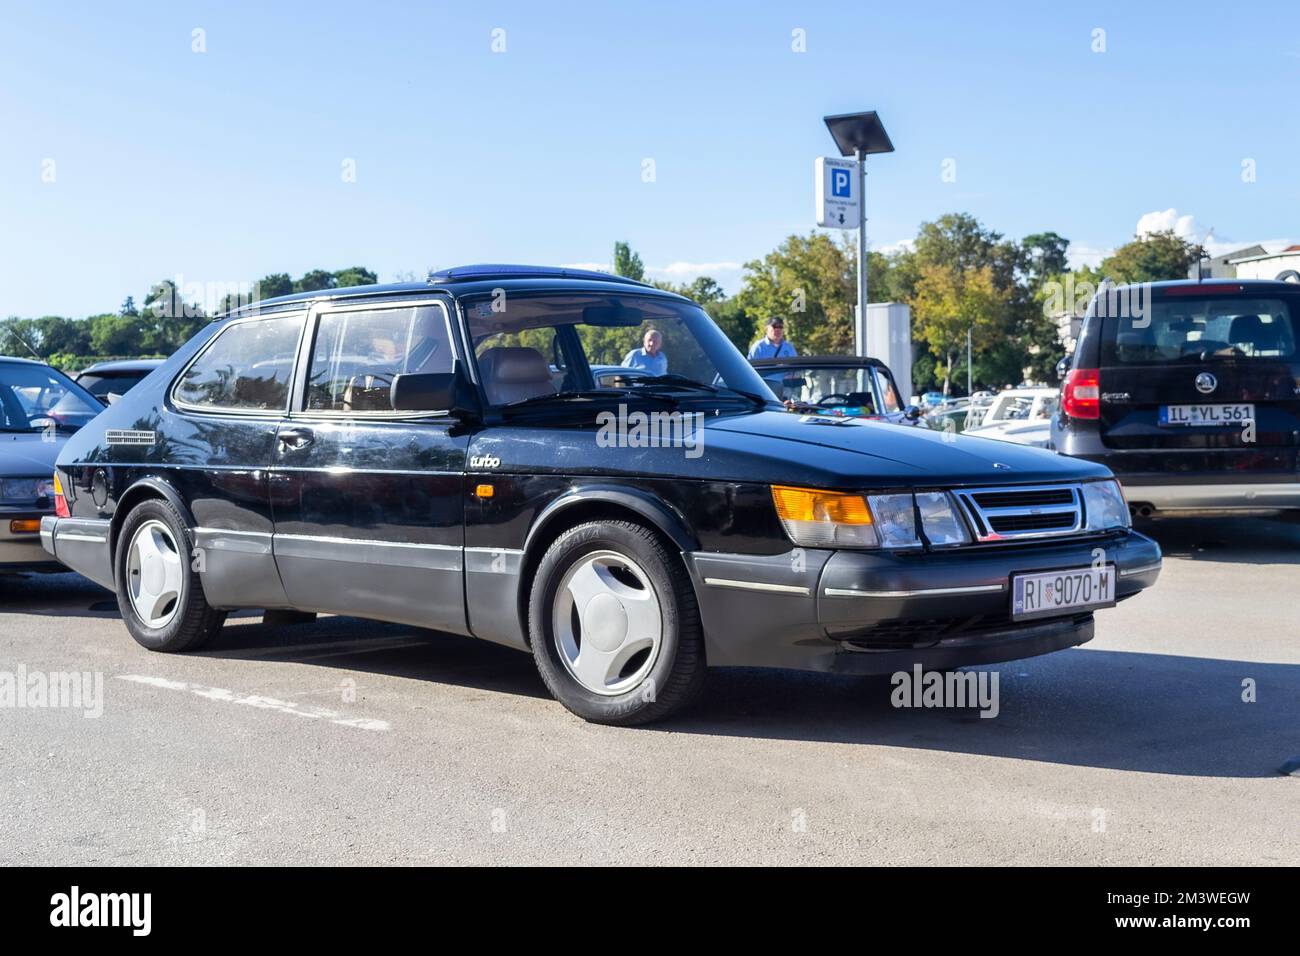 A black Saab 900 turbo, a classic old-timer car from the 1980s and 1990s Stock Photo